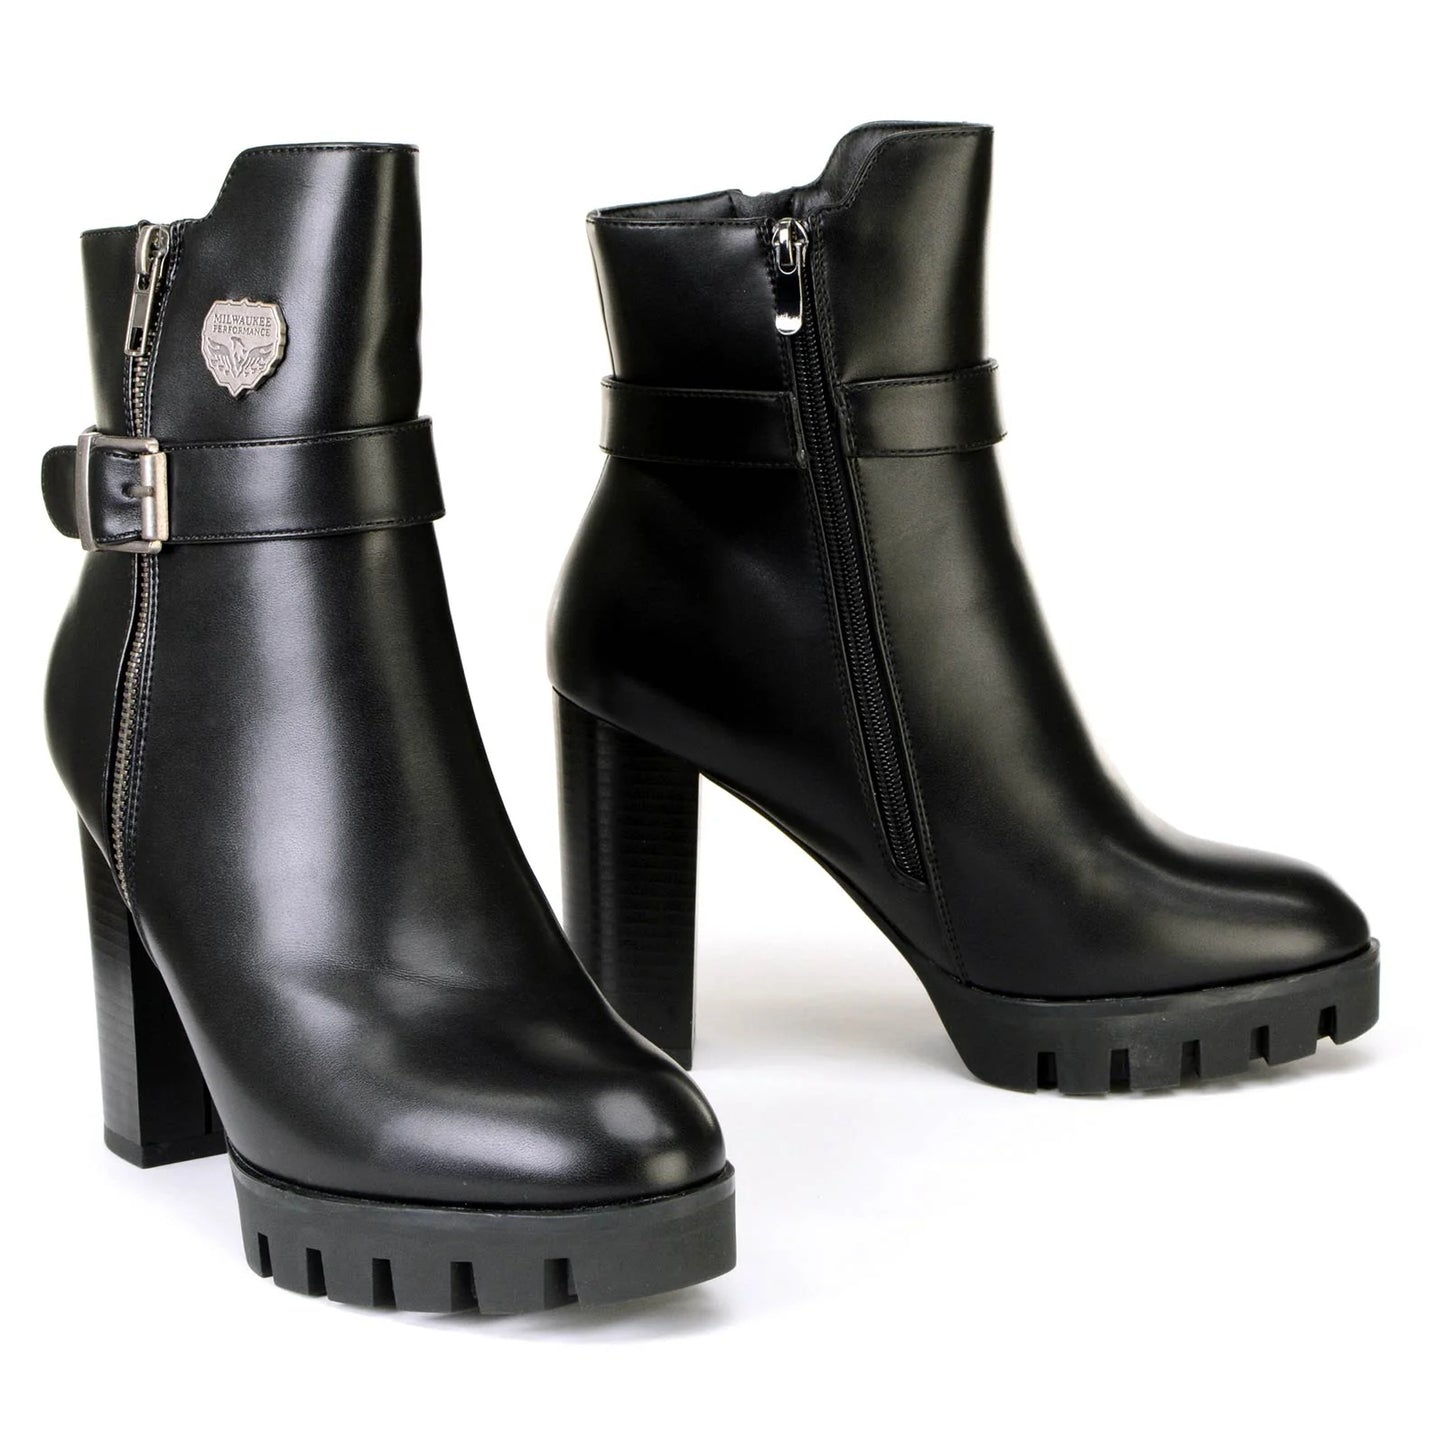 Women's Black Fashion Casual Boots With Side Zipper Entry